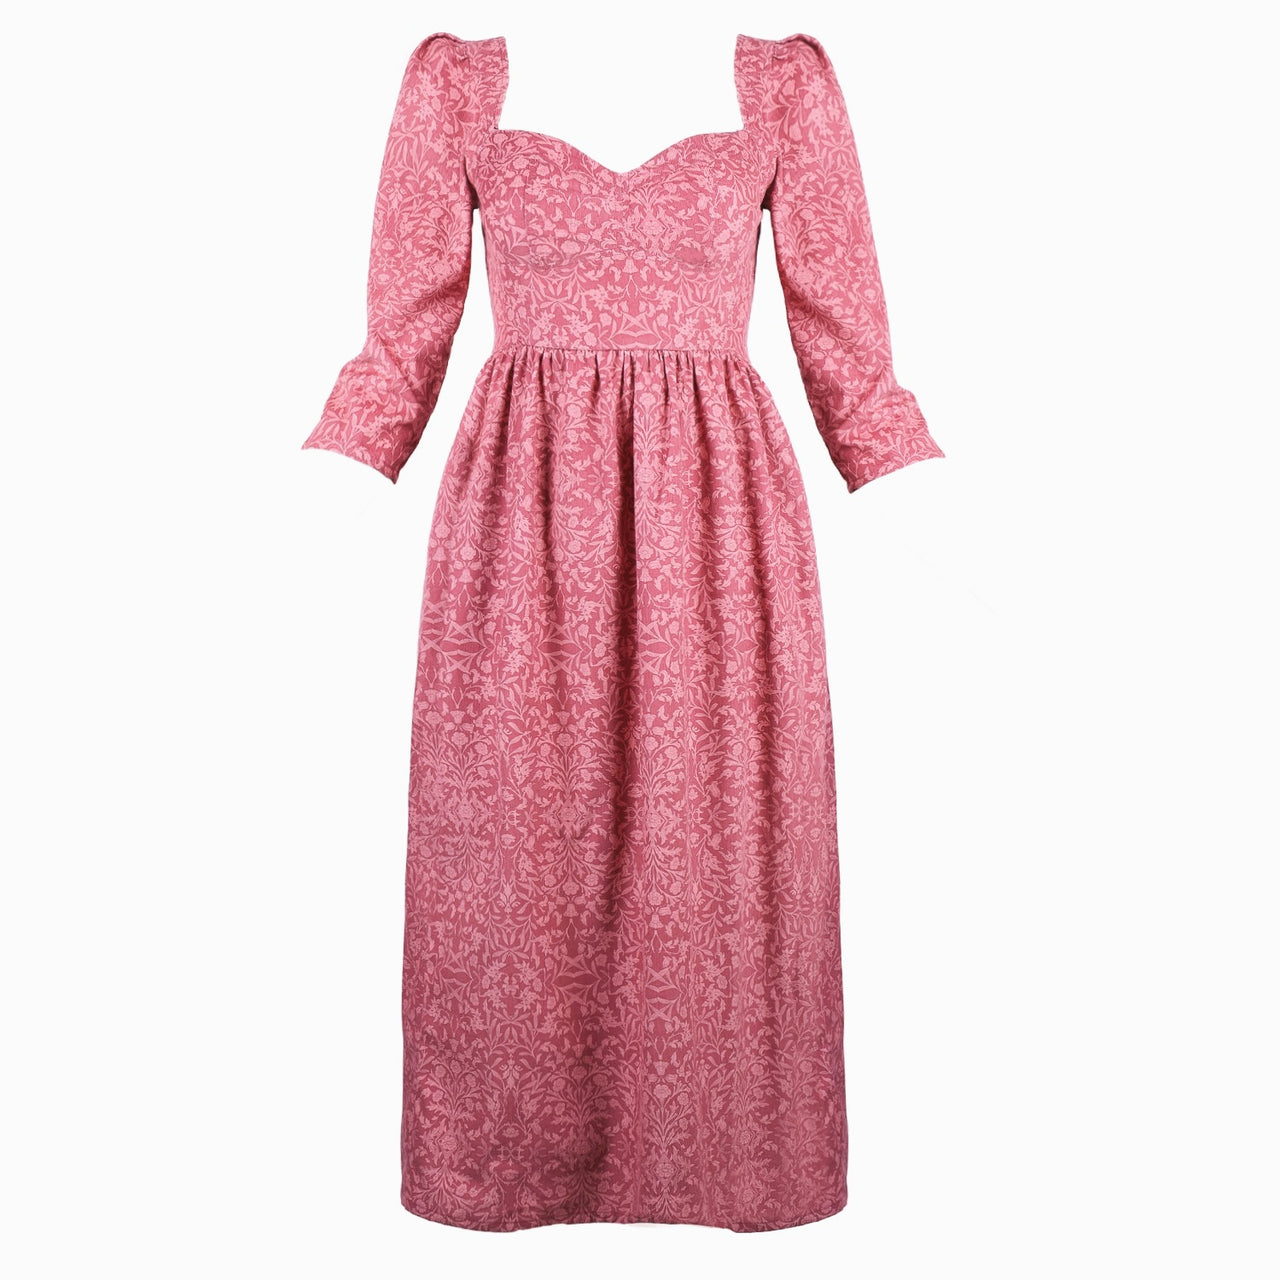 Violet Dress with Sweetheart Neck in Baroque Rose Cotton Cord